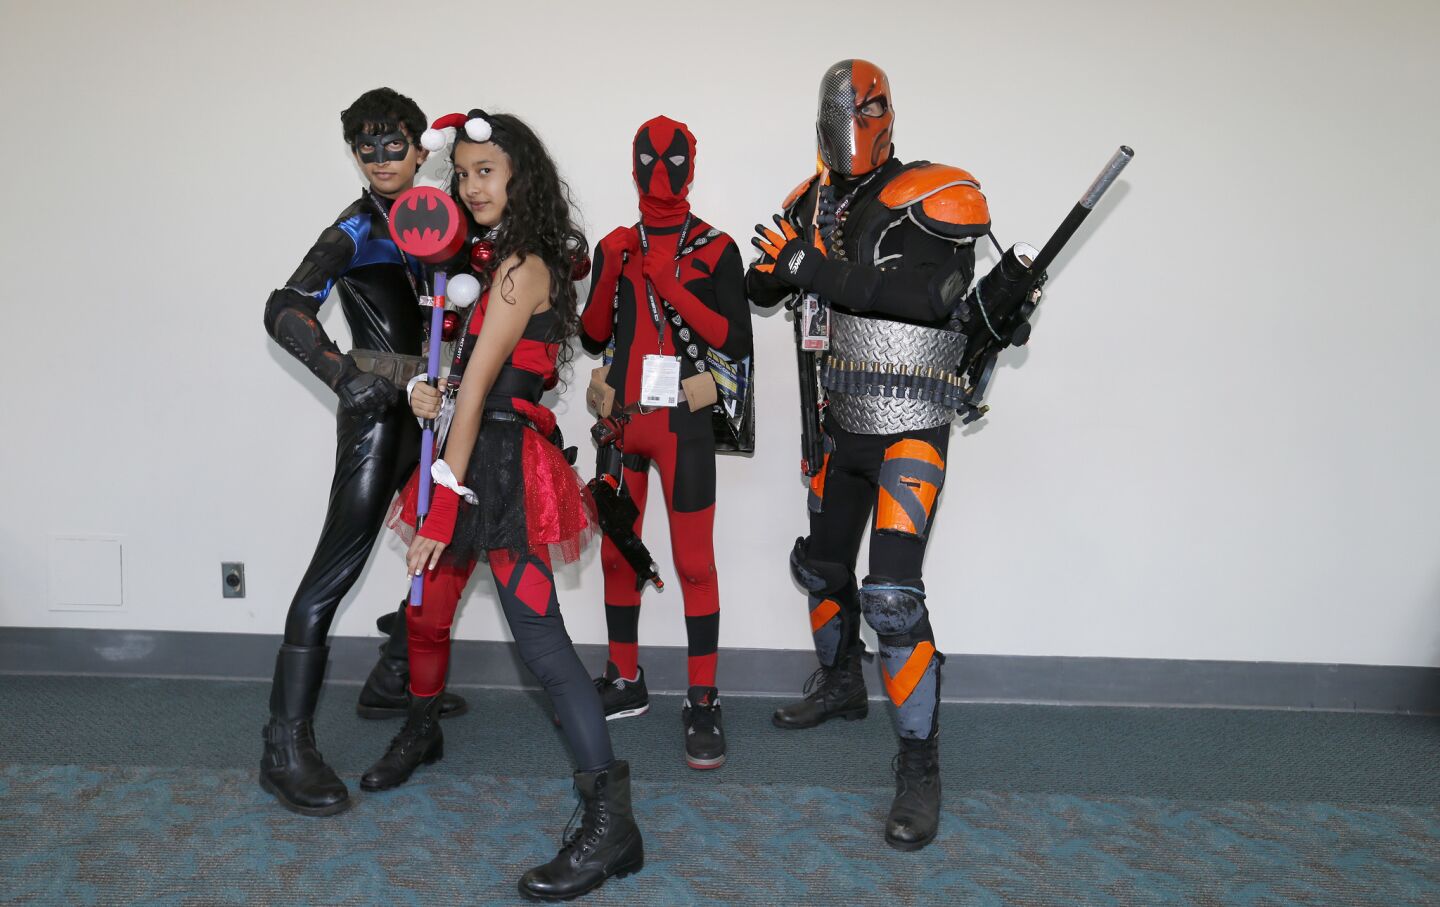 Patrick Meehan, right, of San Diego, dressed as DC comics character Deathstroke, and his children Chris Meehan, left; Charlotte Meehan, as Harley Quinn; and Ryan Meehan, as Spiderman; attend the preview night opener at Comic Con International 2017.